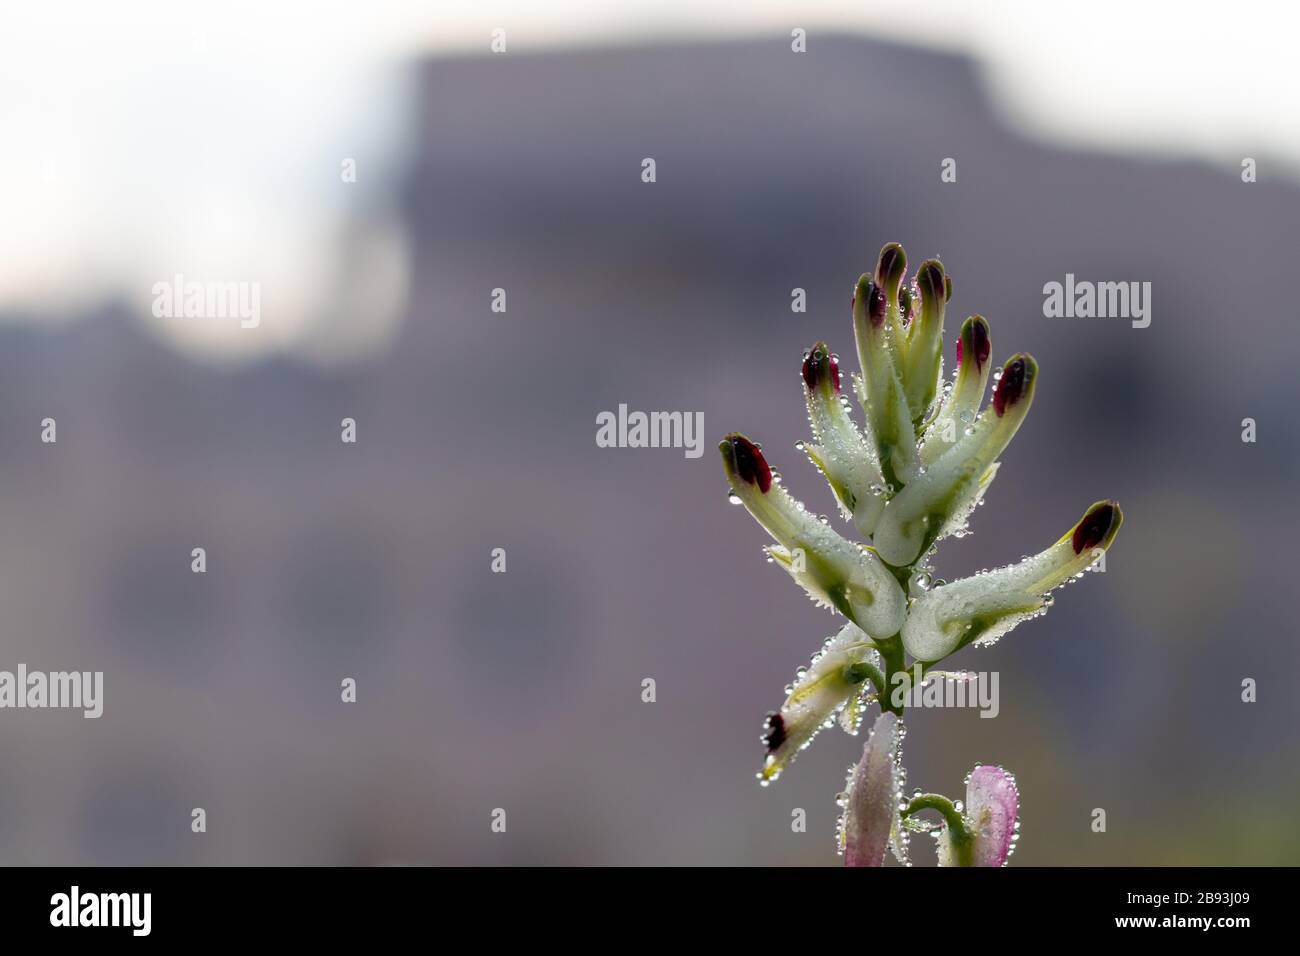 Fumaria capreolata, the white ramping fumitory, close-up on dew drops on the flower and leaves, blurred background. Stock Photo